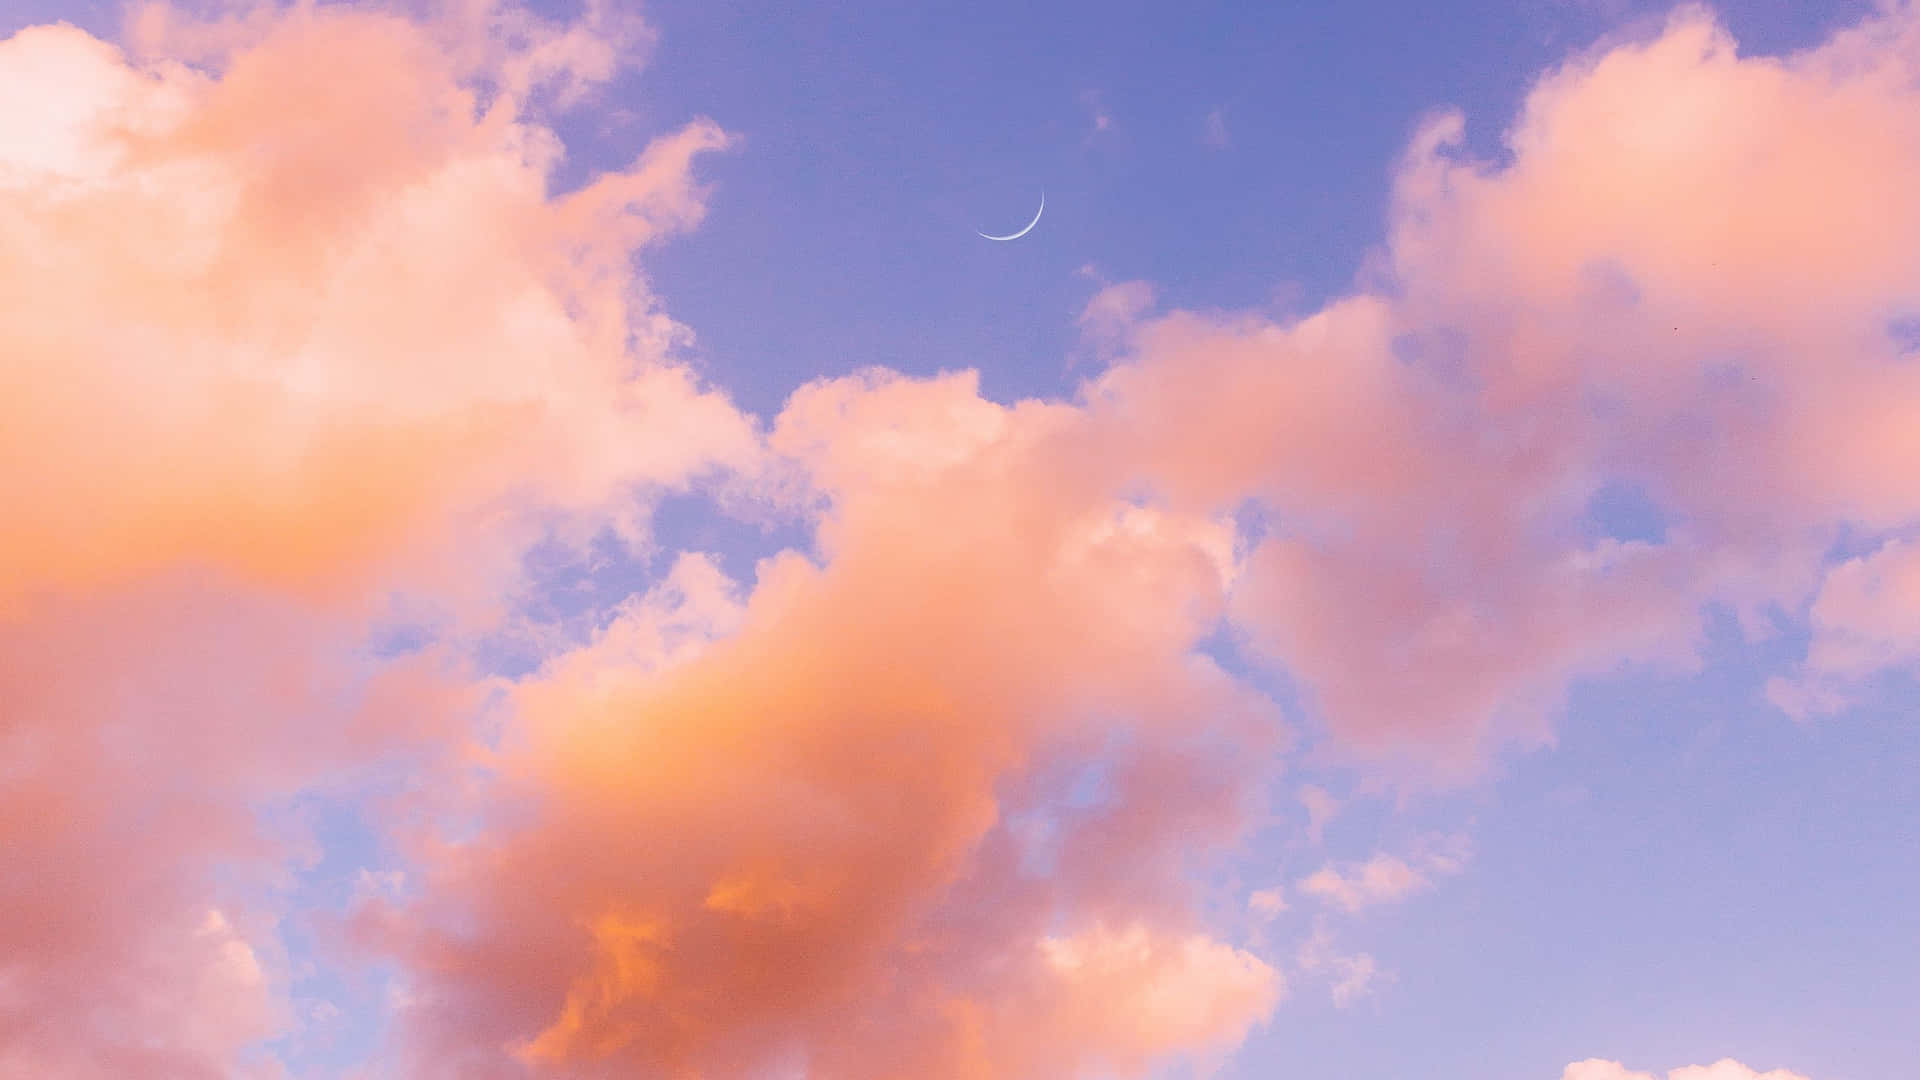 Magnificent views of the clouds in different shades of blue, pink and yellow